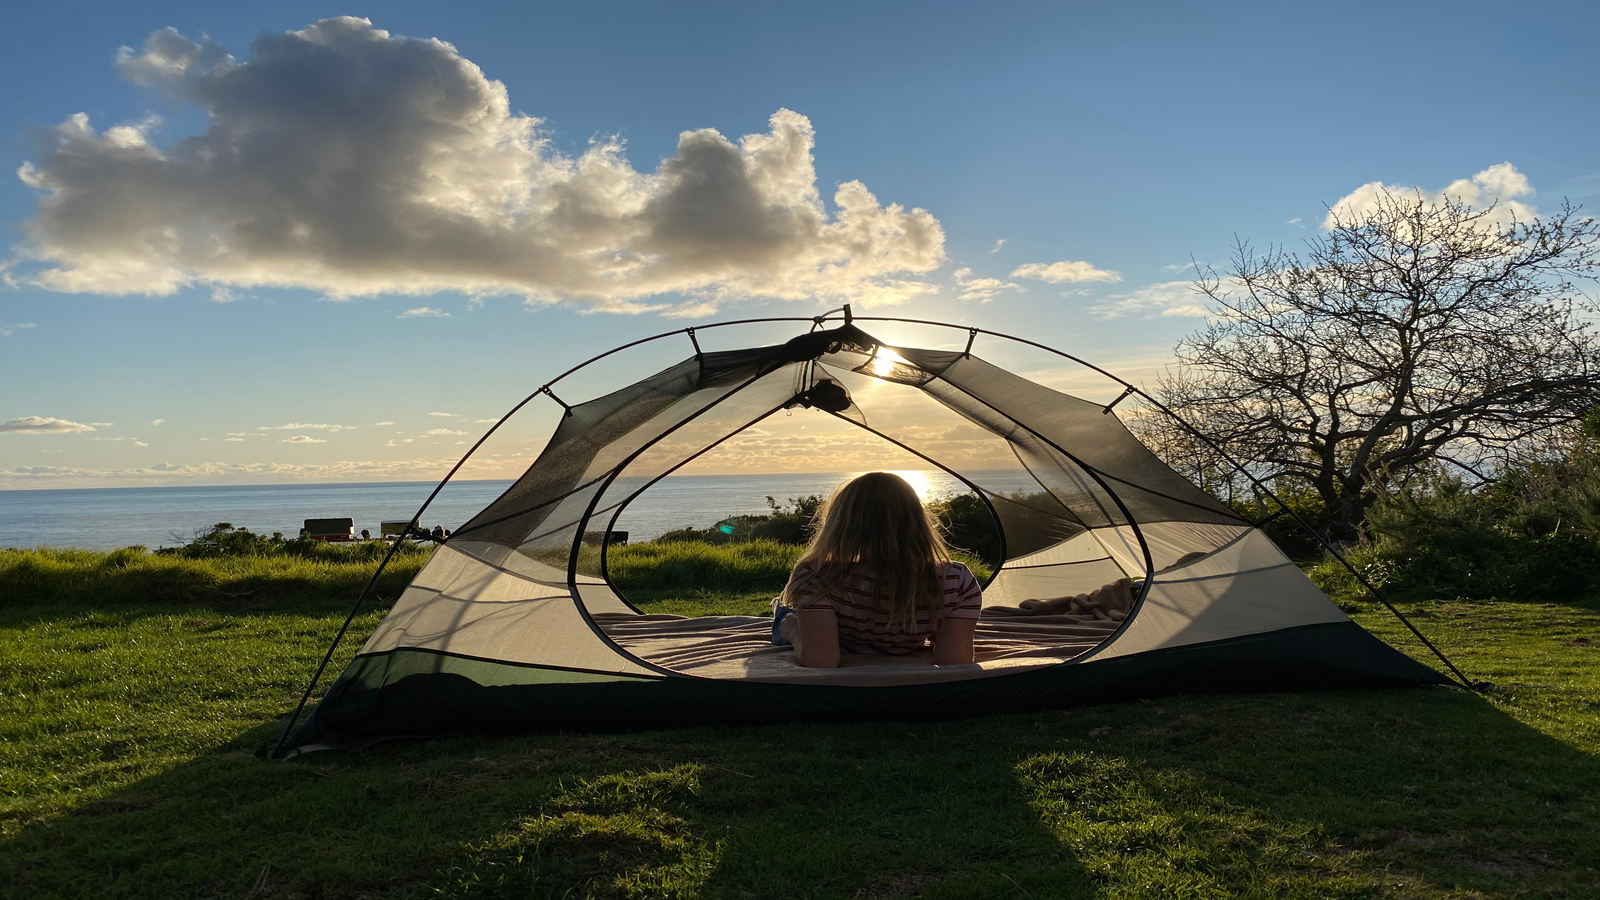 <p>Camping brings you very close to nature. And when it comes to the Golden State, you’re in camping heaven. </p>  <p>The essentials in the list make you well-prepared for the overall camping road trip so you don’t face any challenges along the way or on the actual campground.</p>  <p>If this is going to be your first camping road trip, chill out. We’ve covered everything that you’ll need, so just hit the road and start camping!</p>